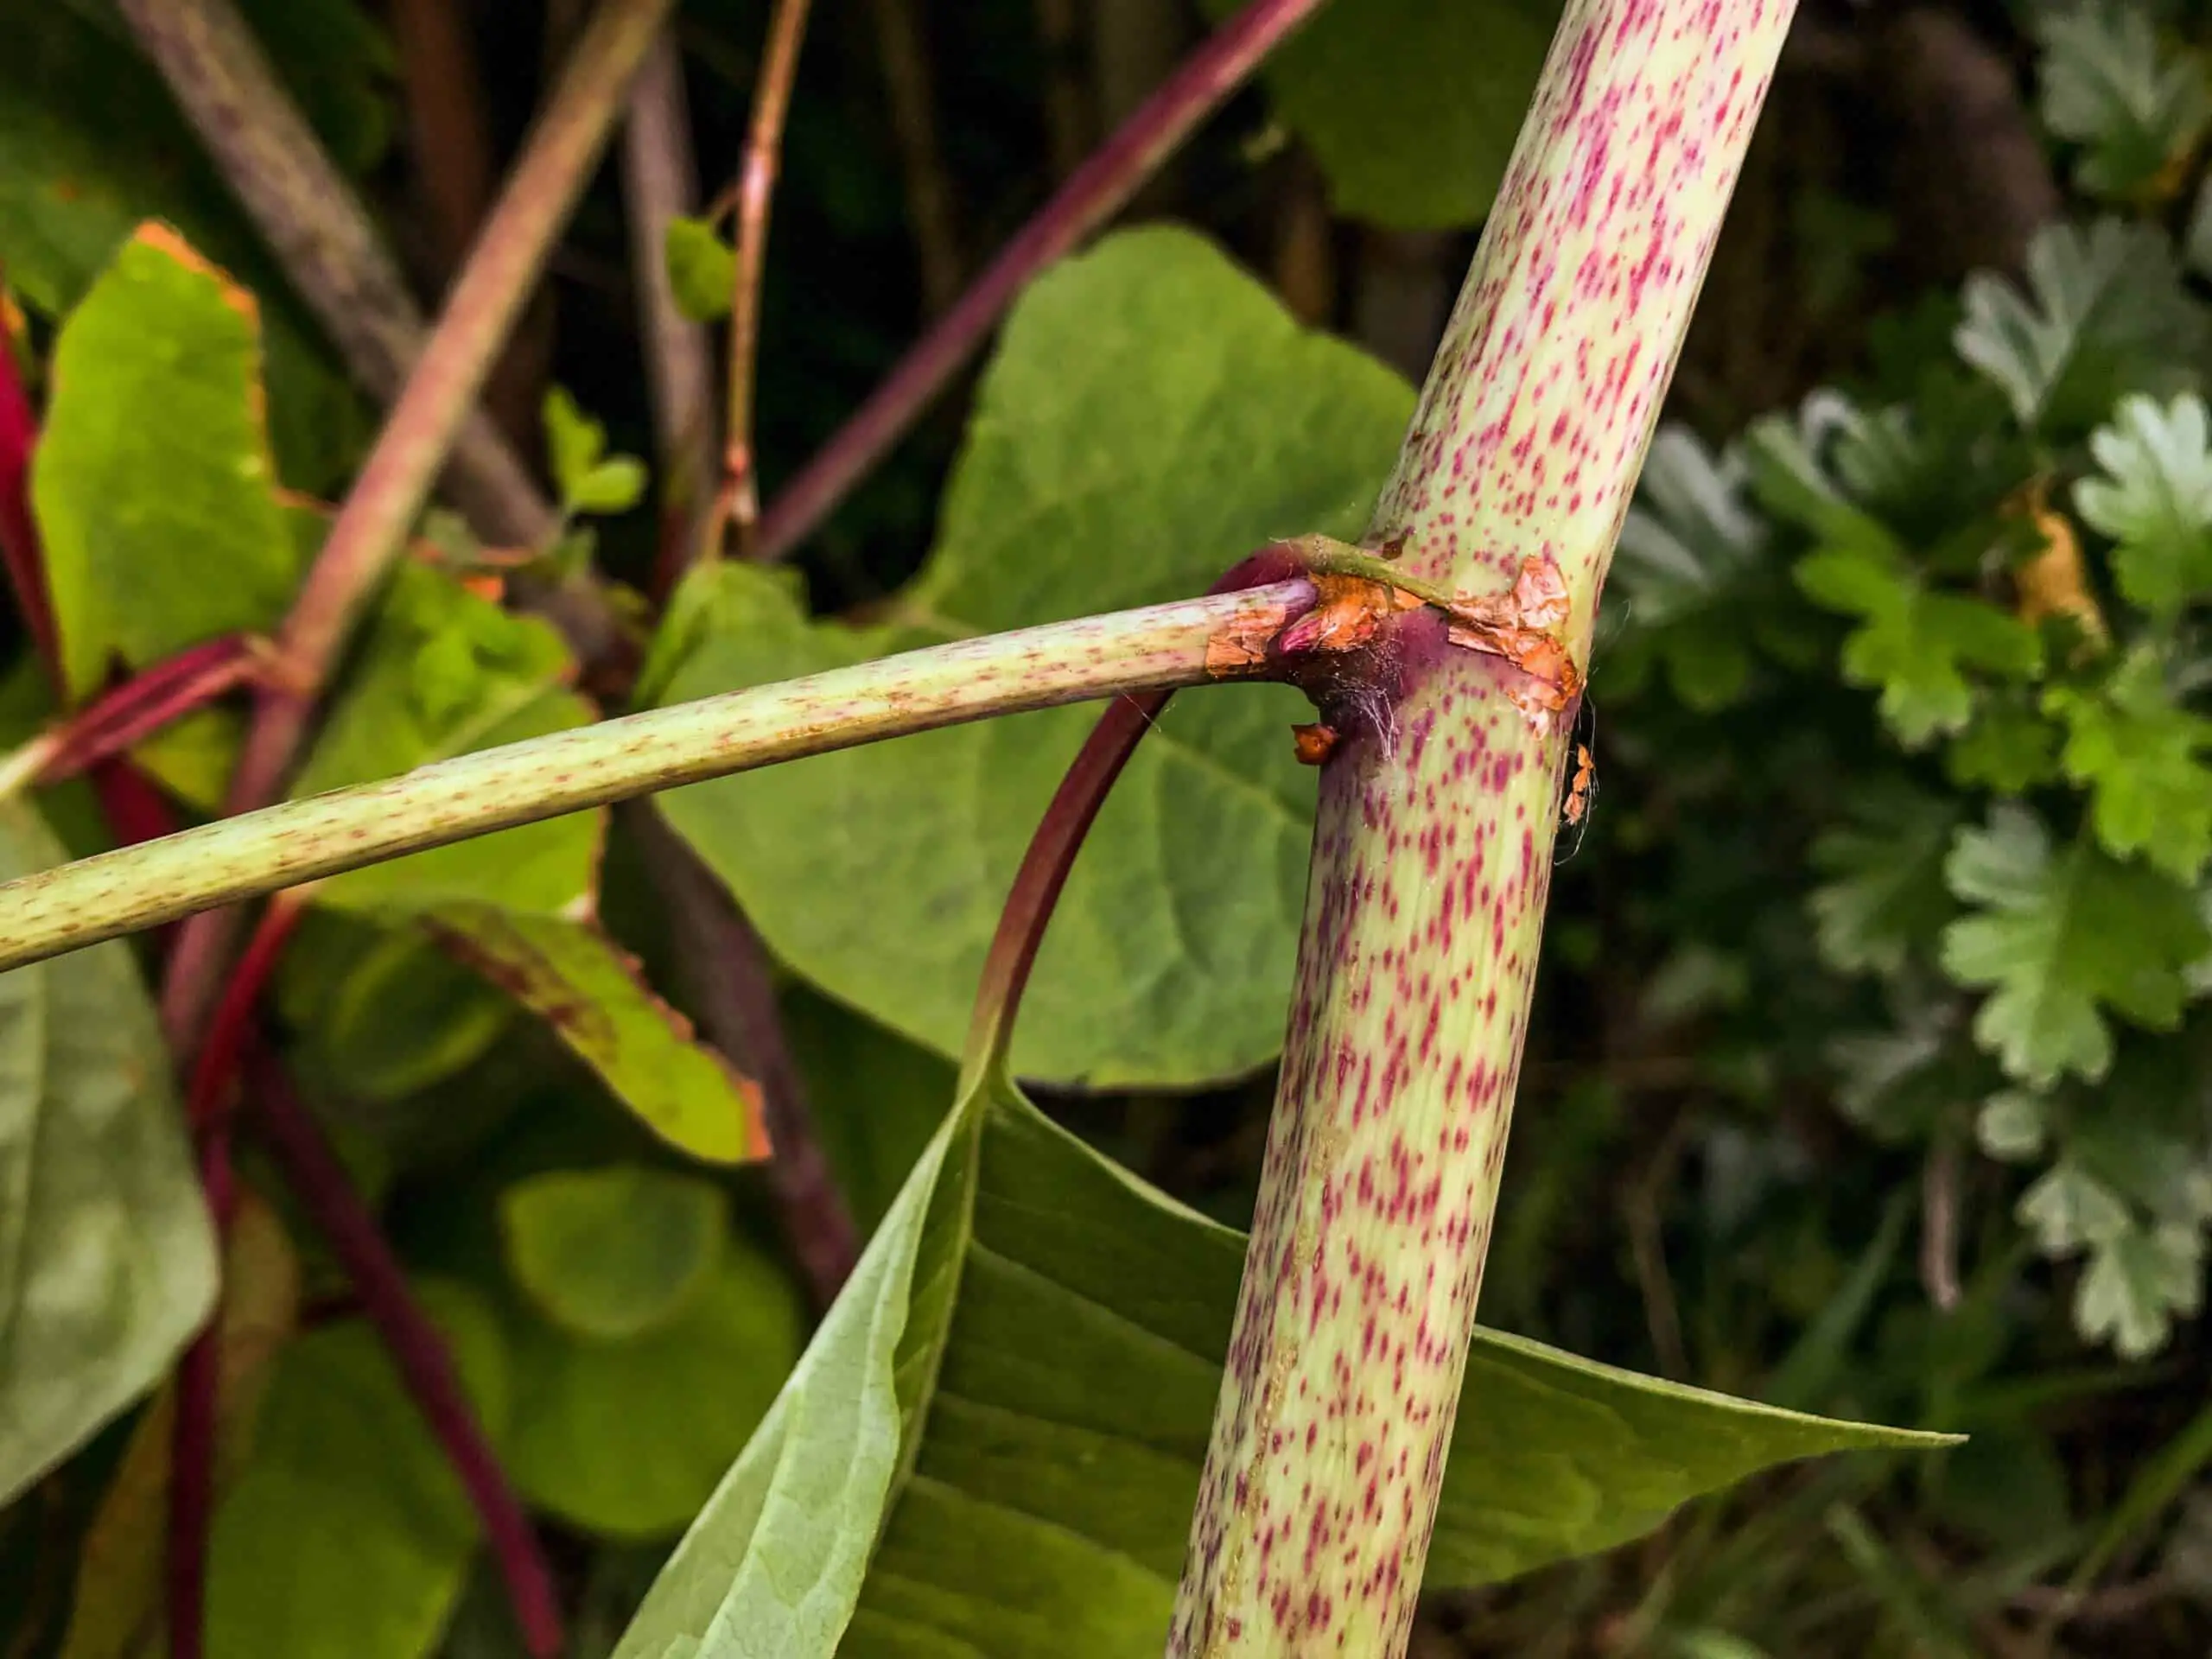 The speckled bamboo-like stem of Japanese Knotweed